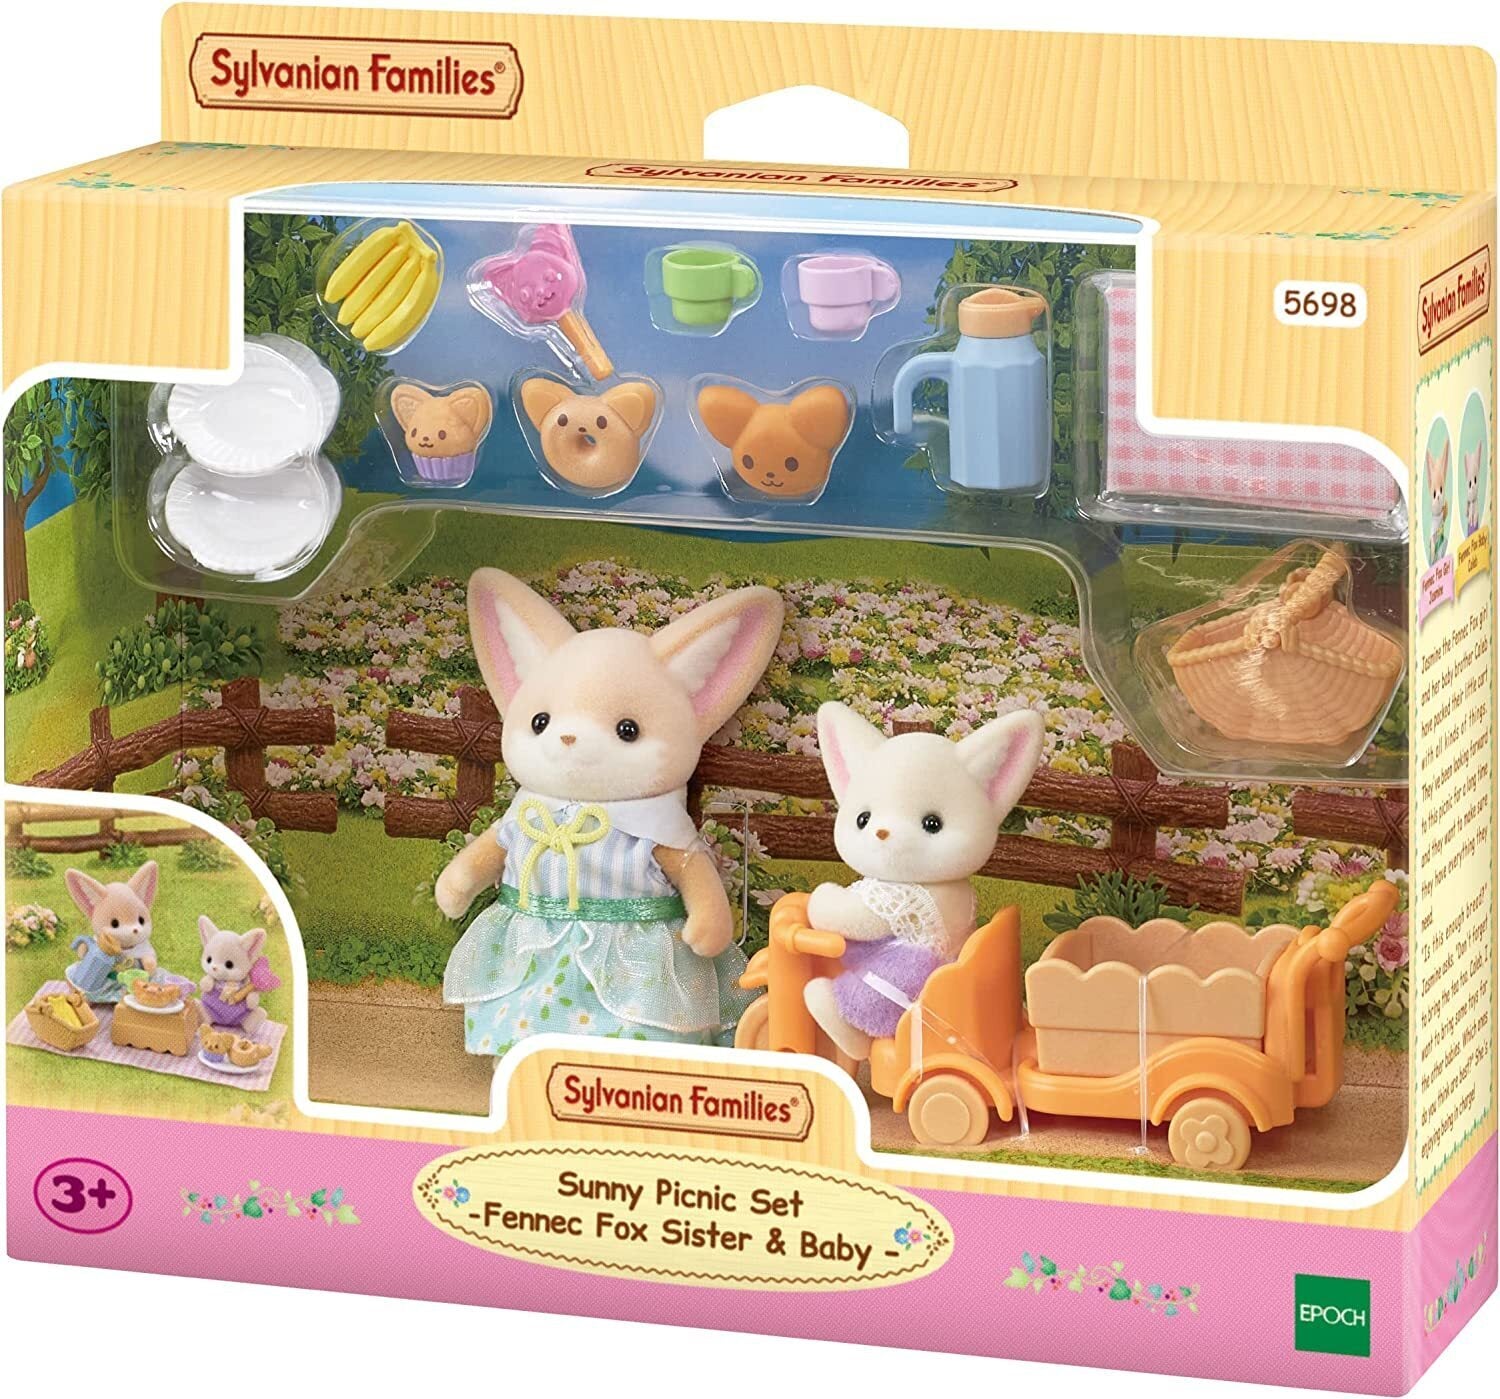 SF5698 Sunny Picnic Set Fennec Fox Sister and Baby